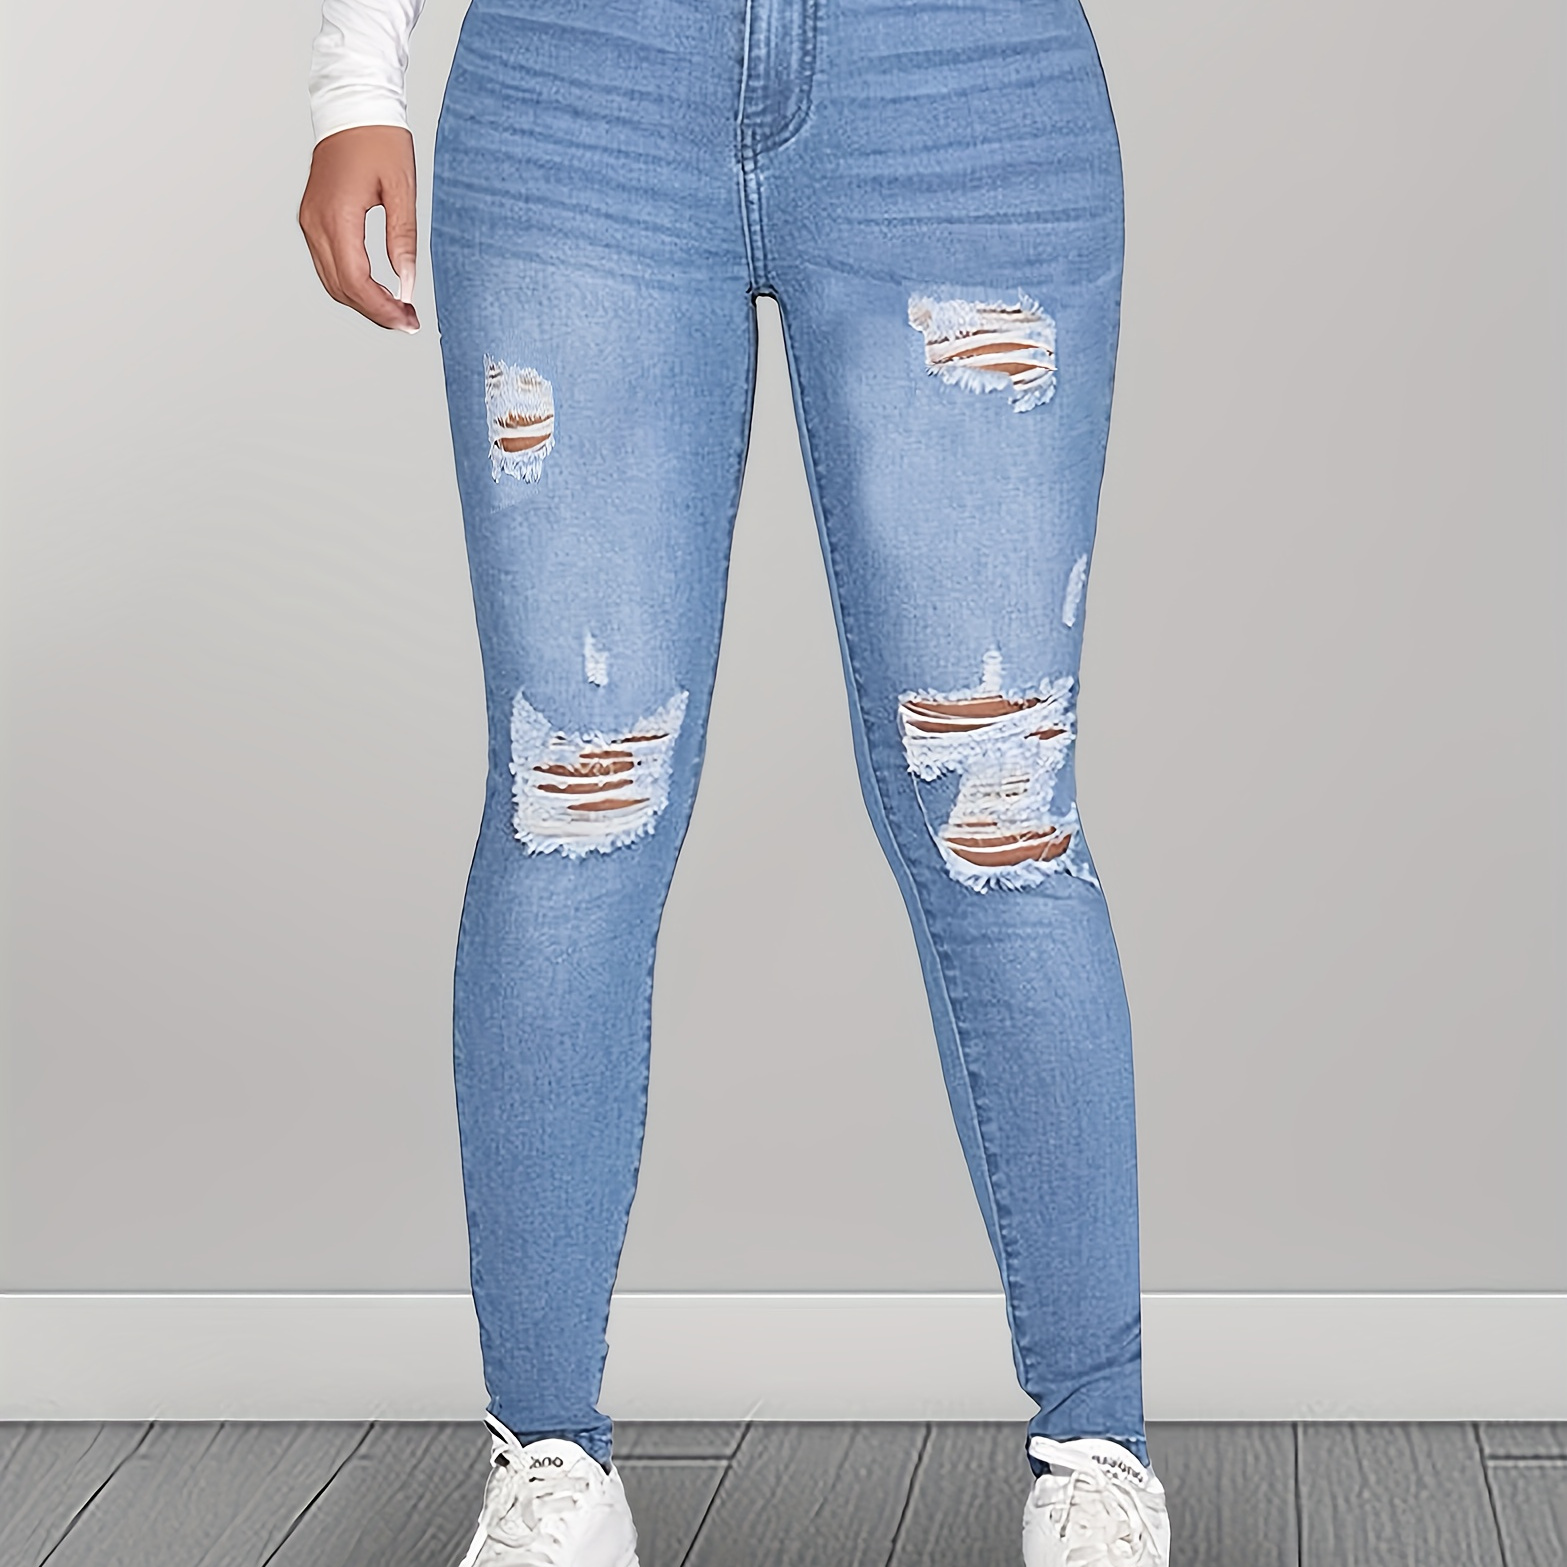 

Ripped Holes Washed Skinny Jeans, Slim Fit High Stretch Tight Jeans, Women's Denim Jeans & Clothing